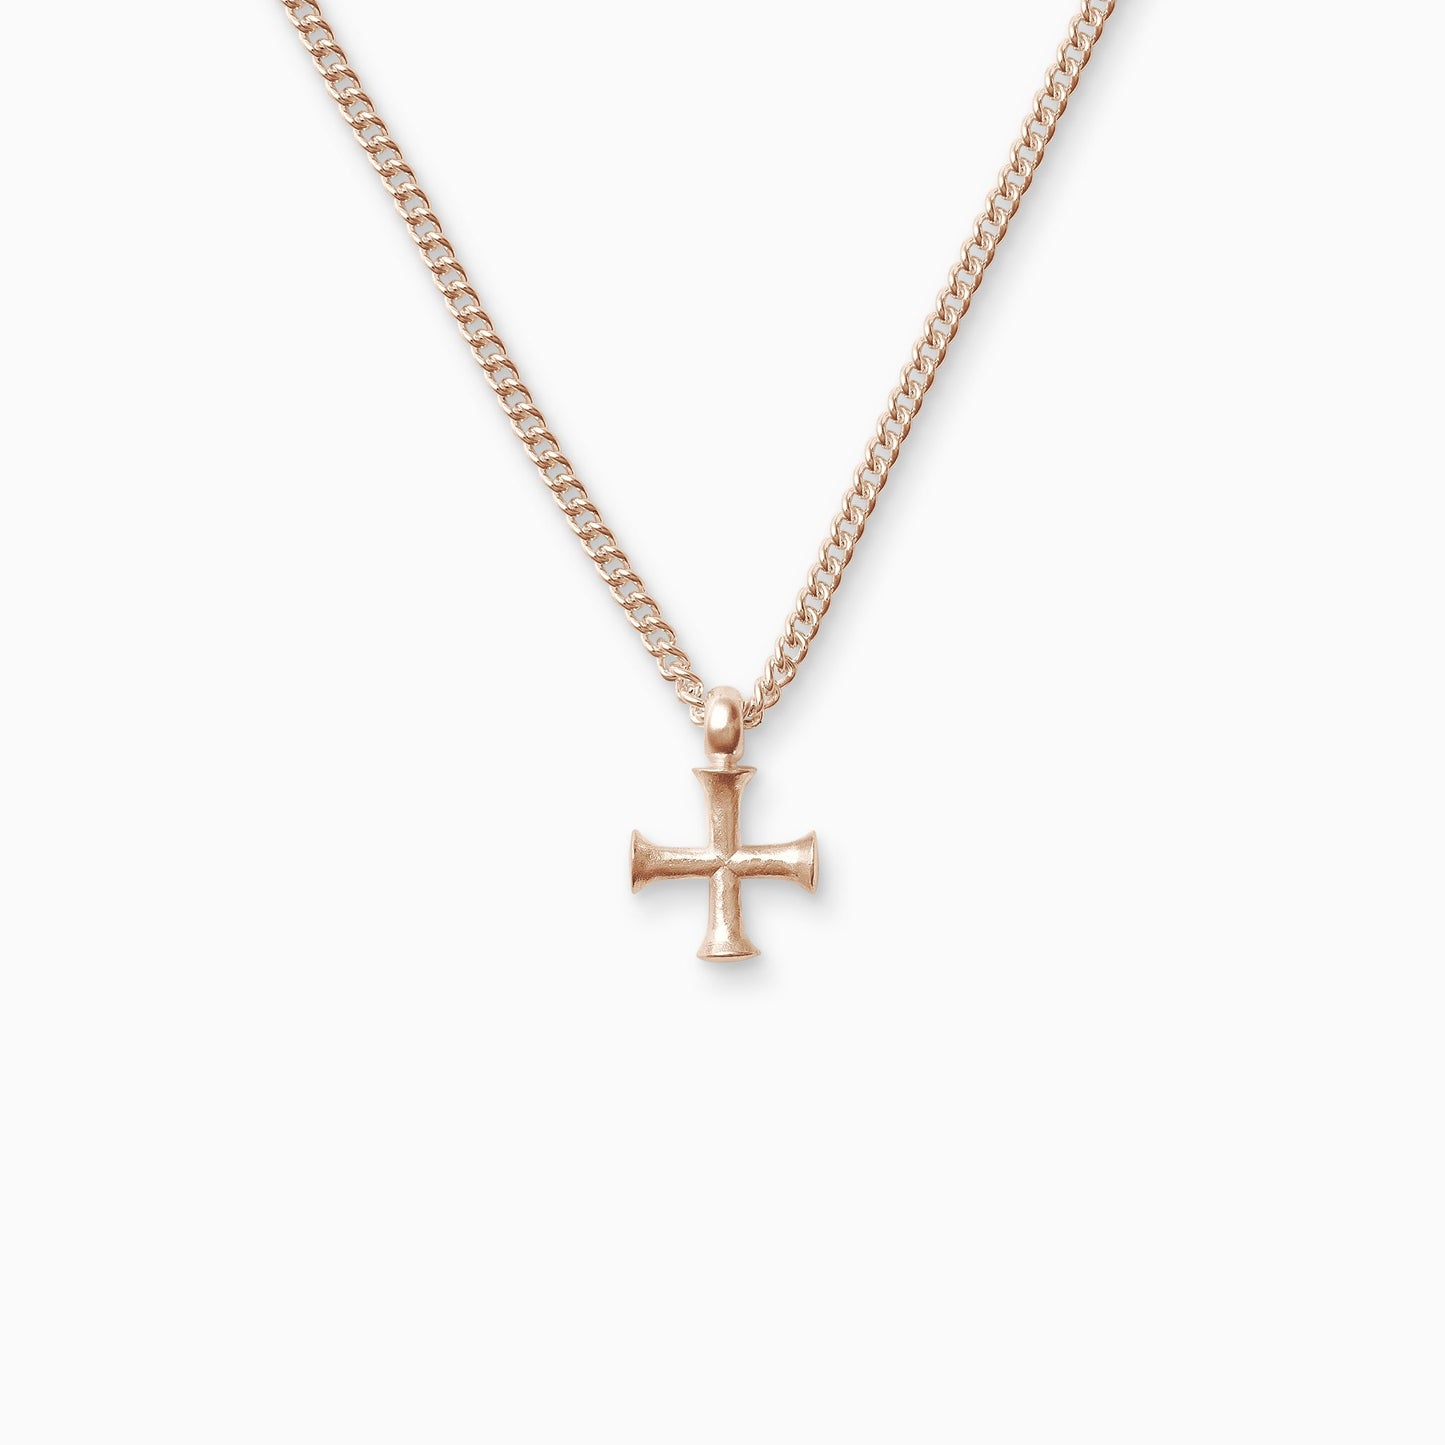 18ct Fairtrade rose gold Byzantine cross, 21mm on a 55cm heavy curb chain. The cross has equal length arms with outward spreading ends.